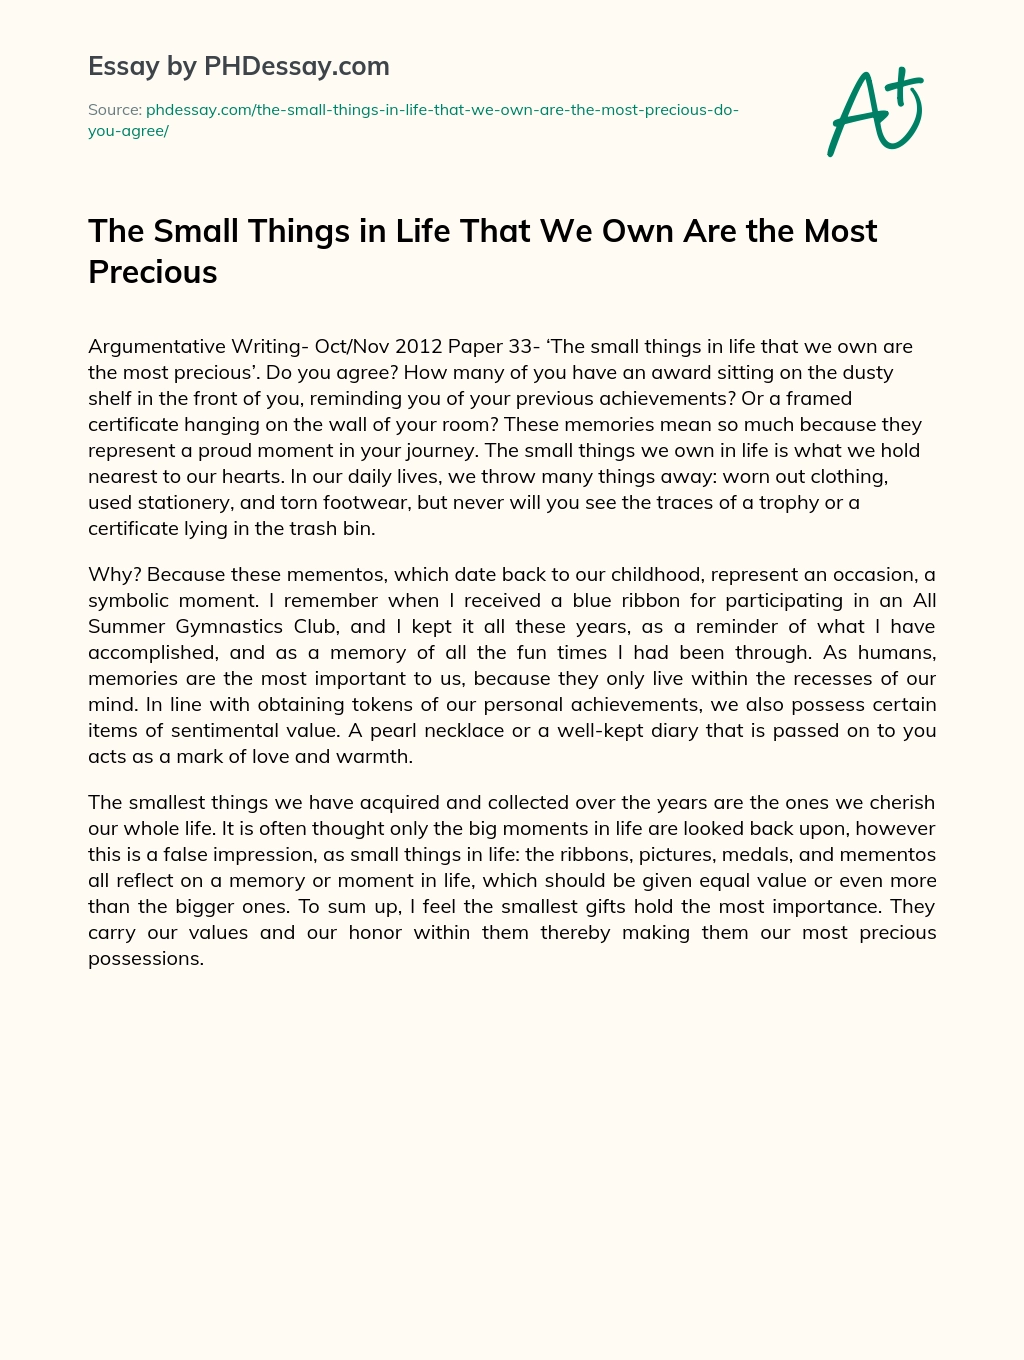 The Small Things in Life That We Own Are the Most Precious essay